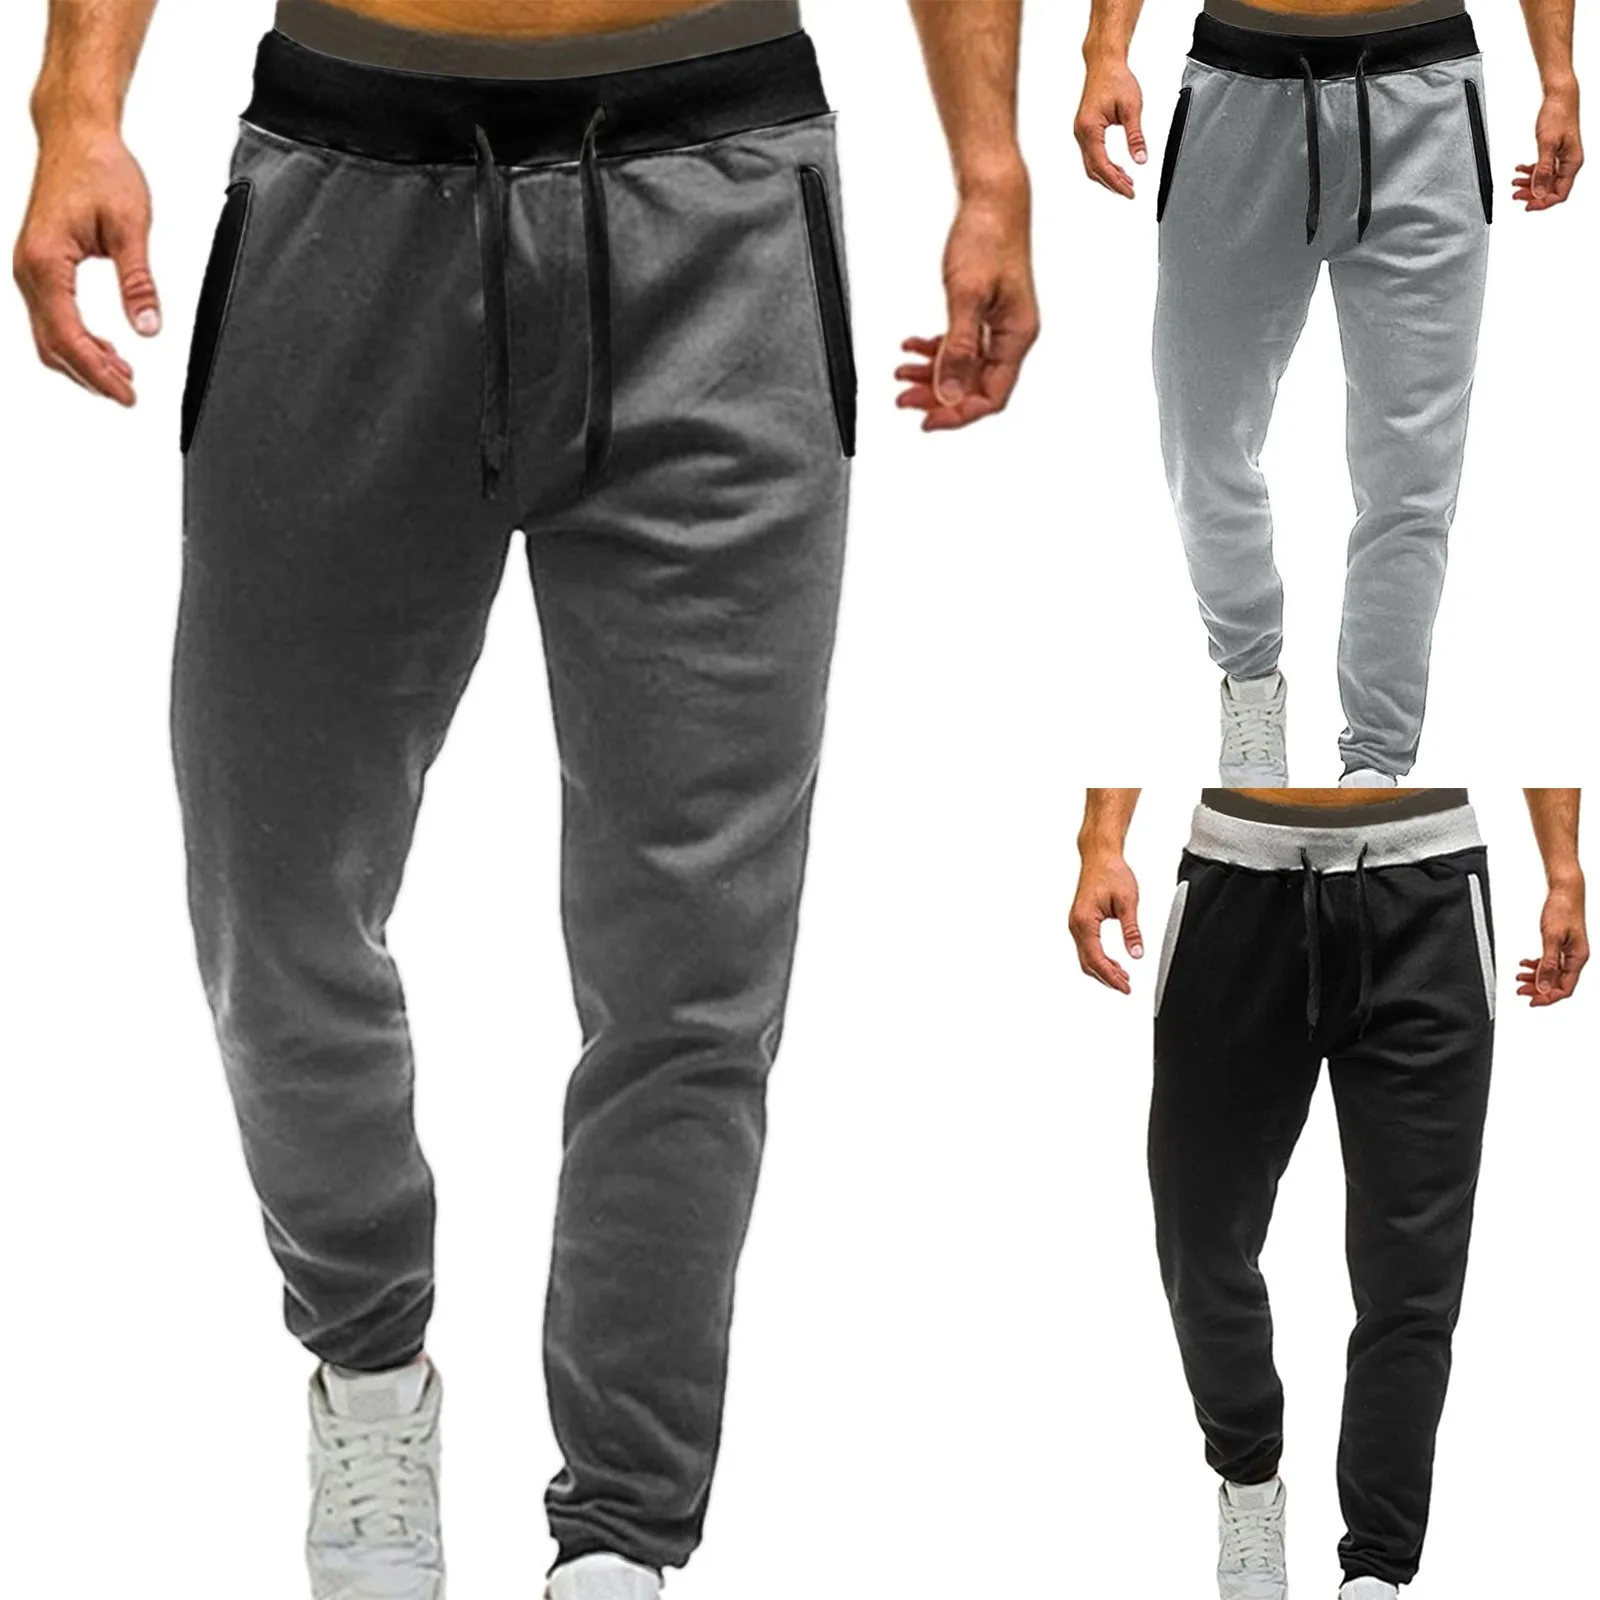 

Man Pants Sportswear Workwear Baggy Sweatpants Straight Gym Tracksuit Outfit Y2k Pantalones Summer Joggers Trousers Big Size